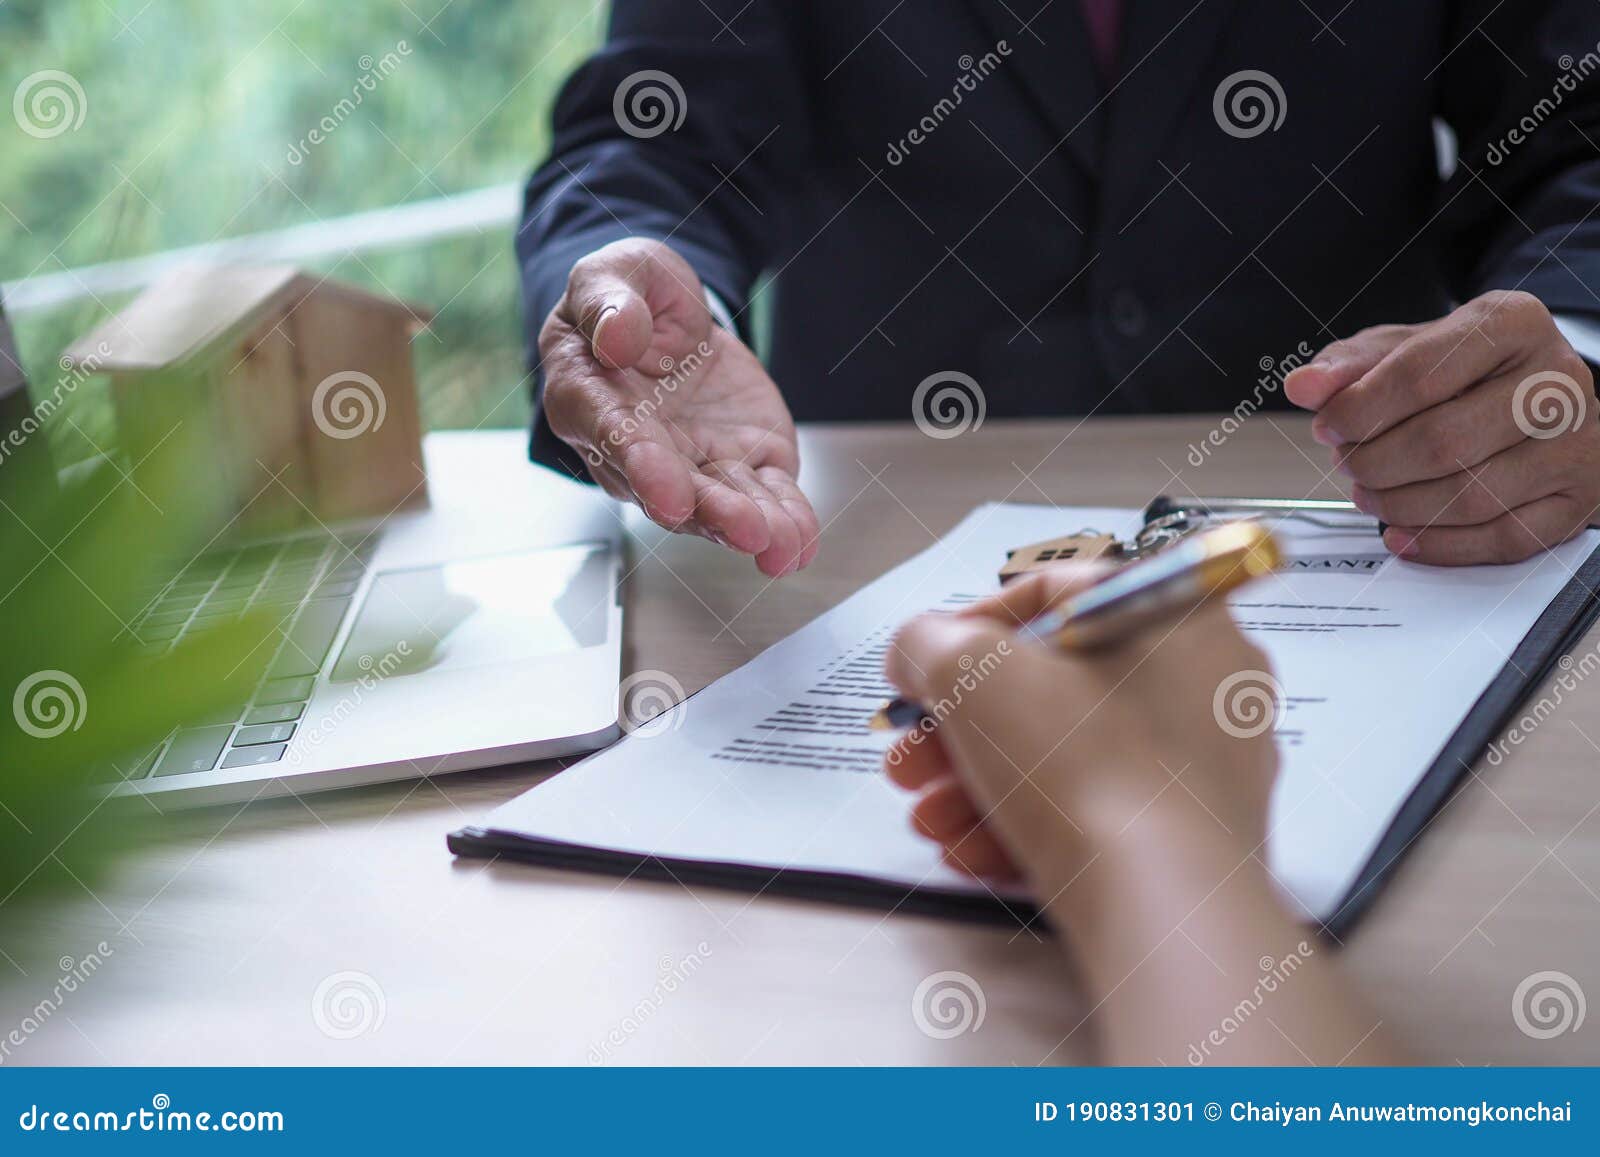 the salesperson explained the landlord legal documents and signed the acknowledgment